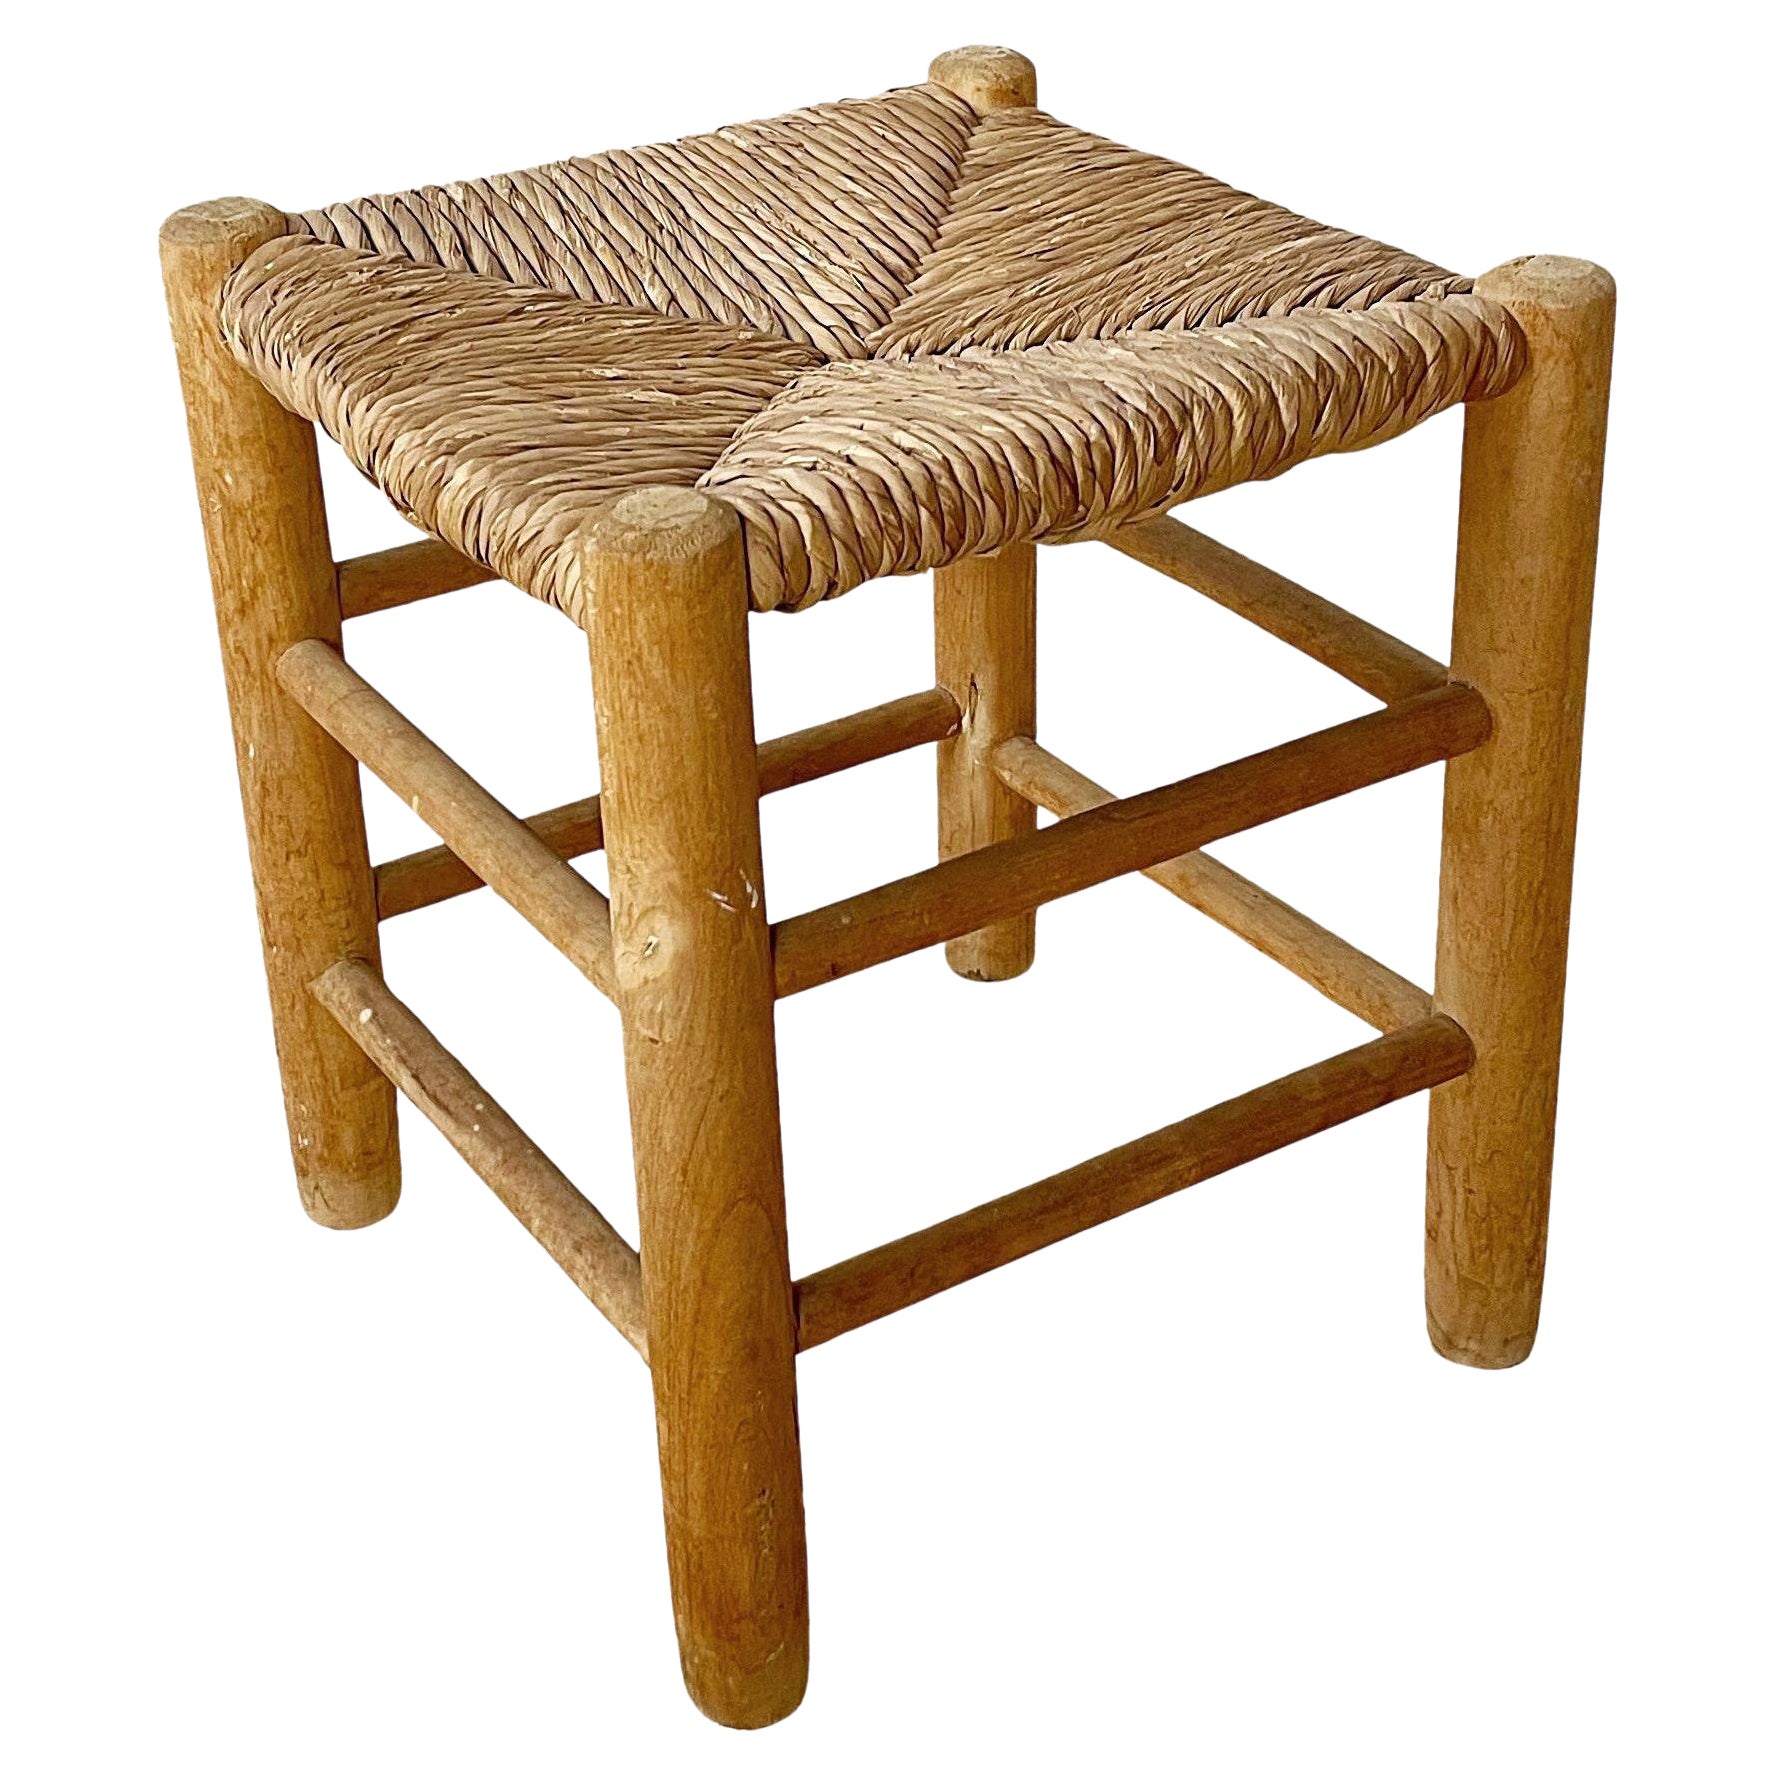 Charlotte Perriand Midcentury "Bauche" Rush Stool, Ash, 1960s, France For Sale